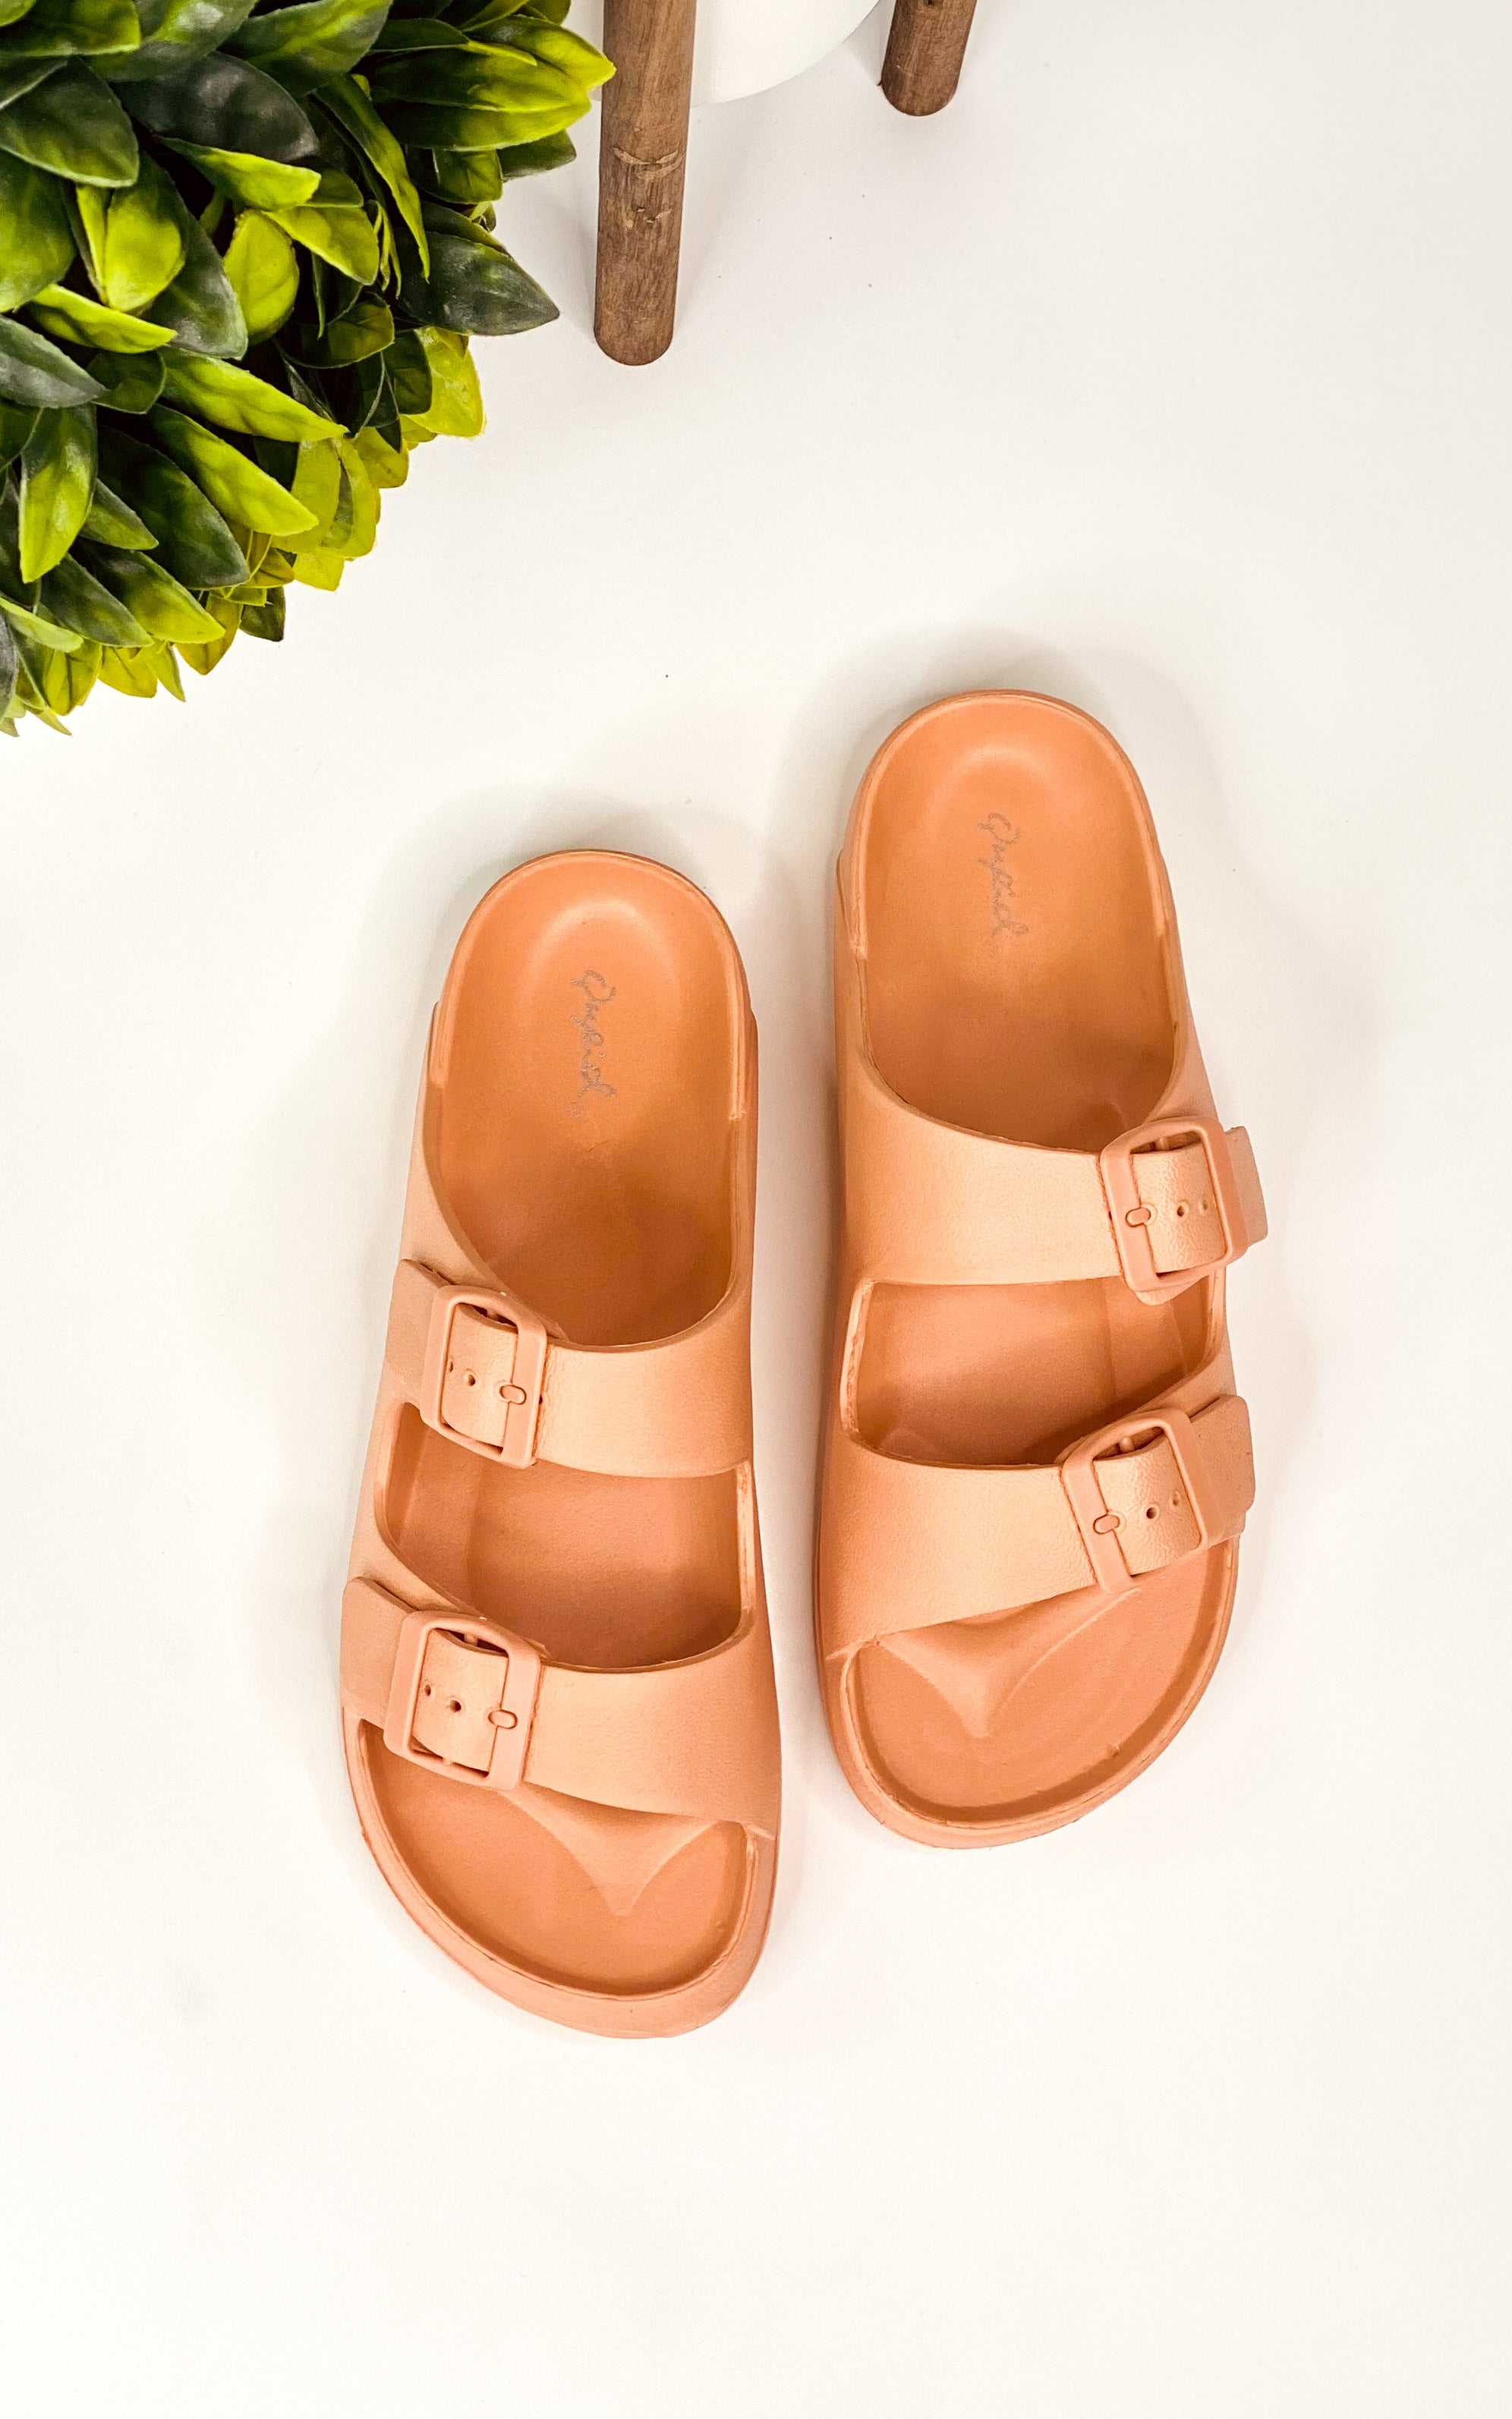 Qupid Lennie Slides in Coral - cantonclothingcompany